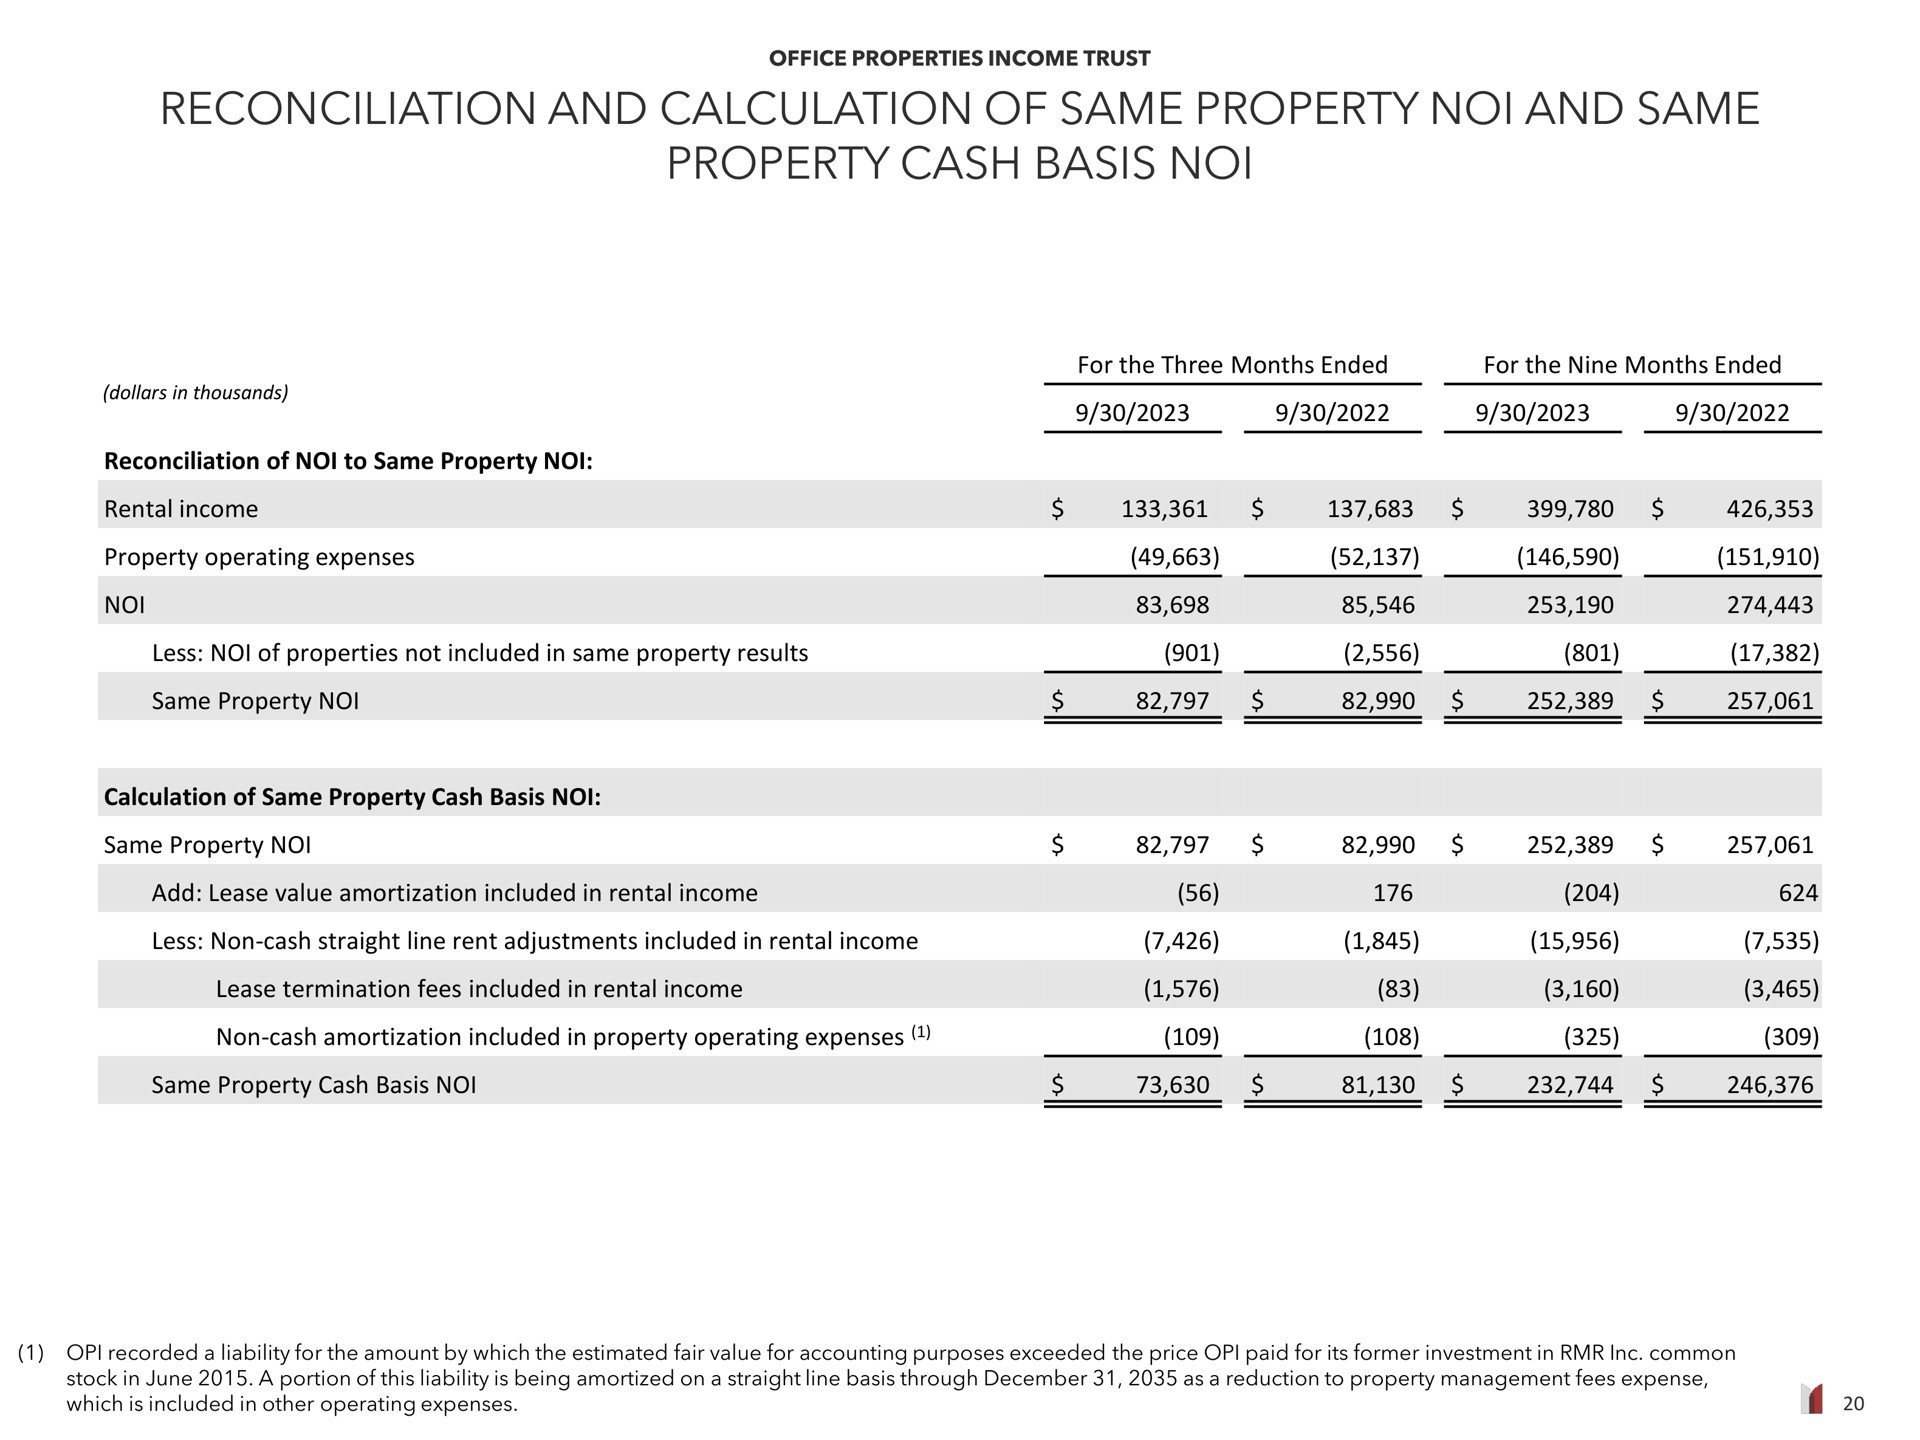 reconciliation and calculation of same property and same property cash basis a | Office Properties Income Trust